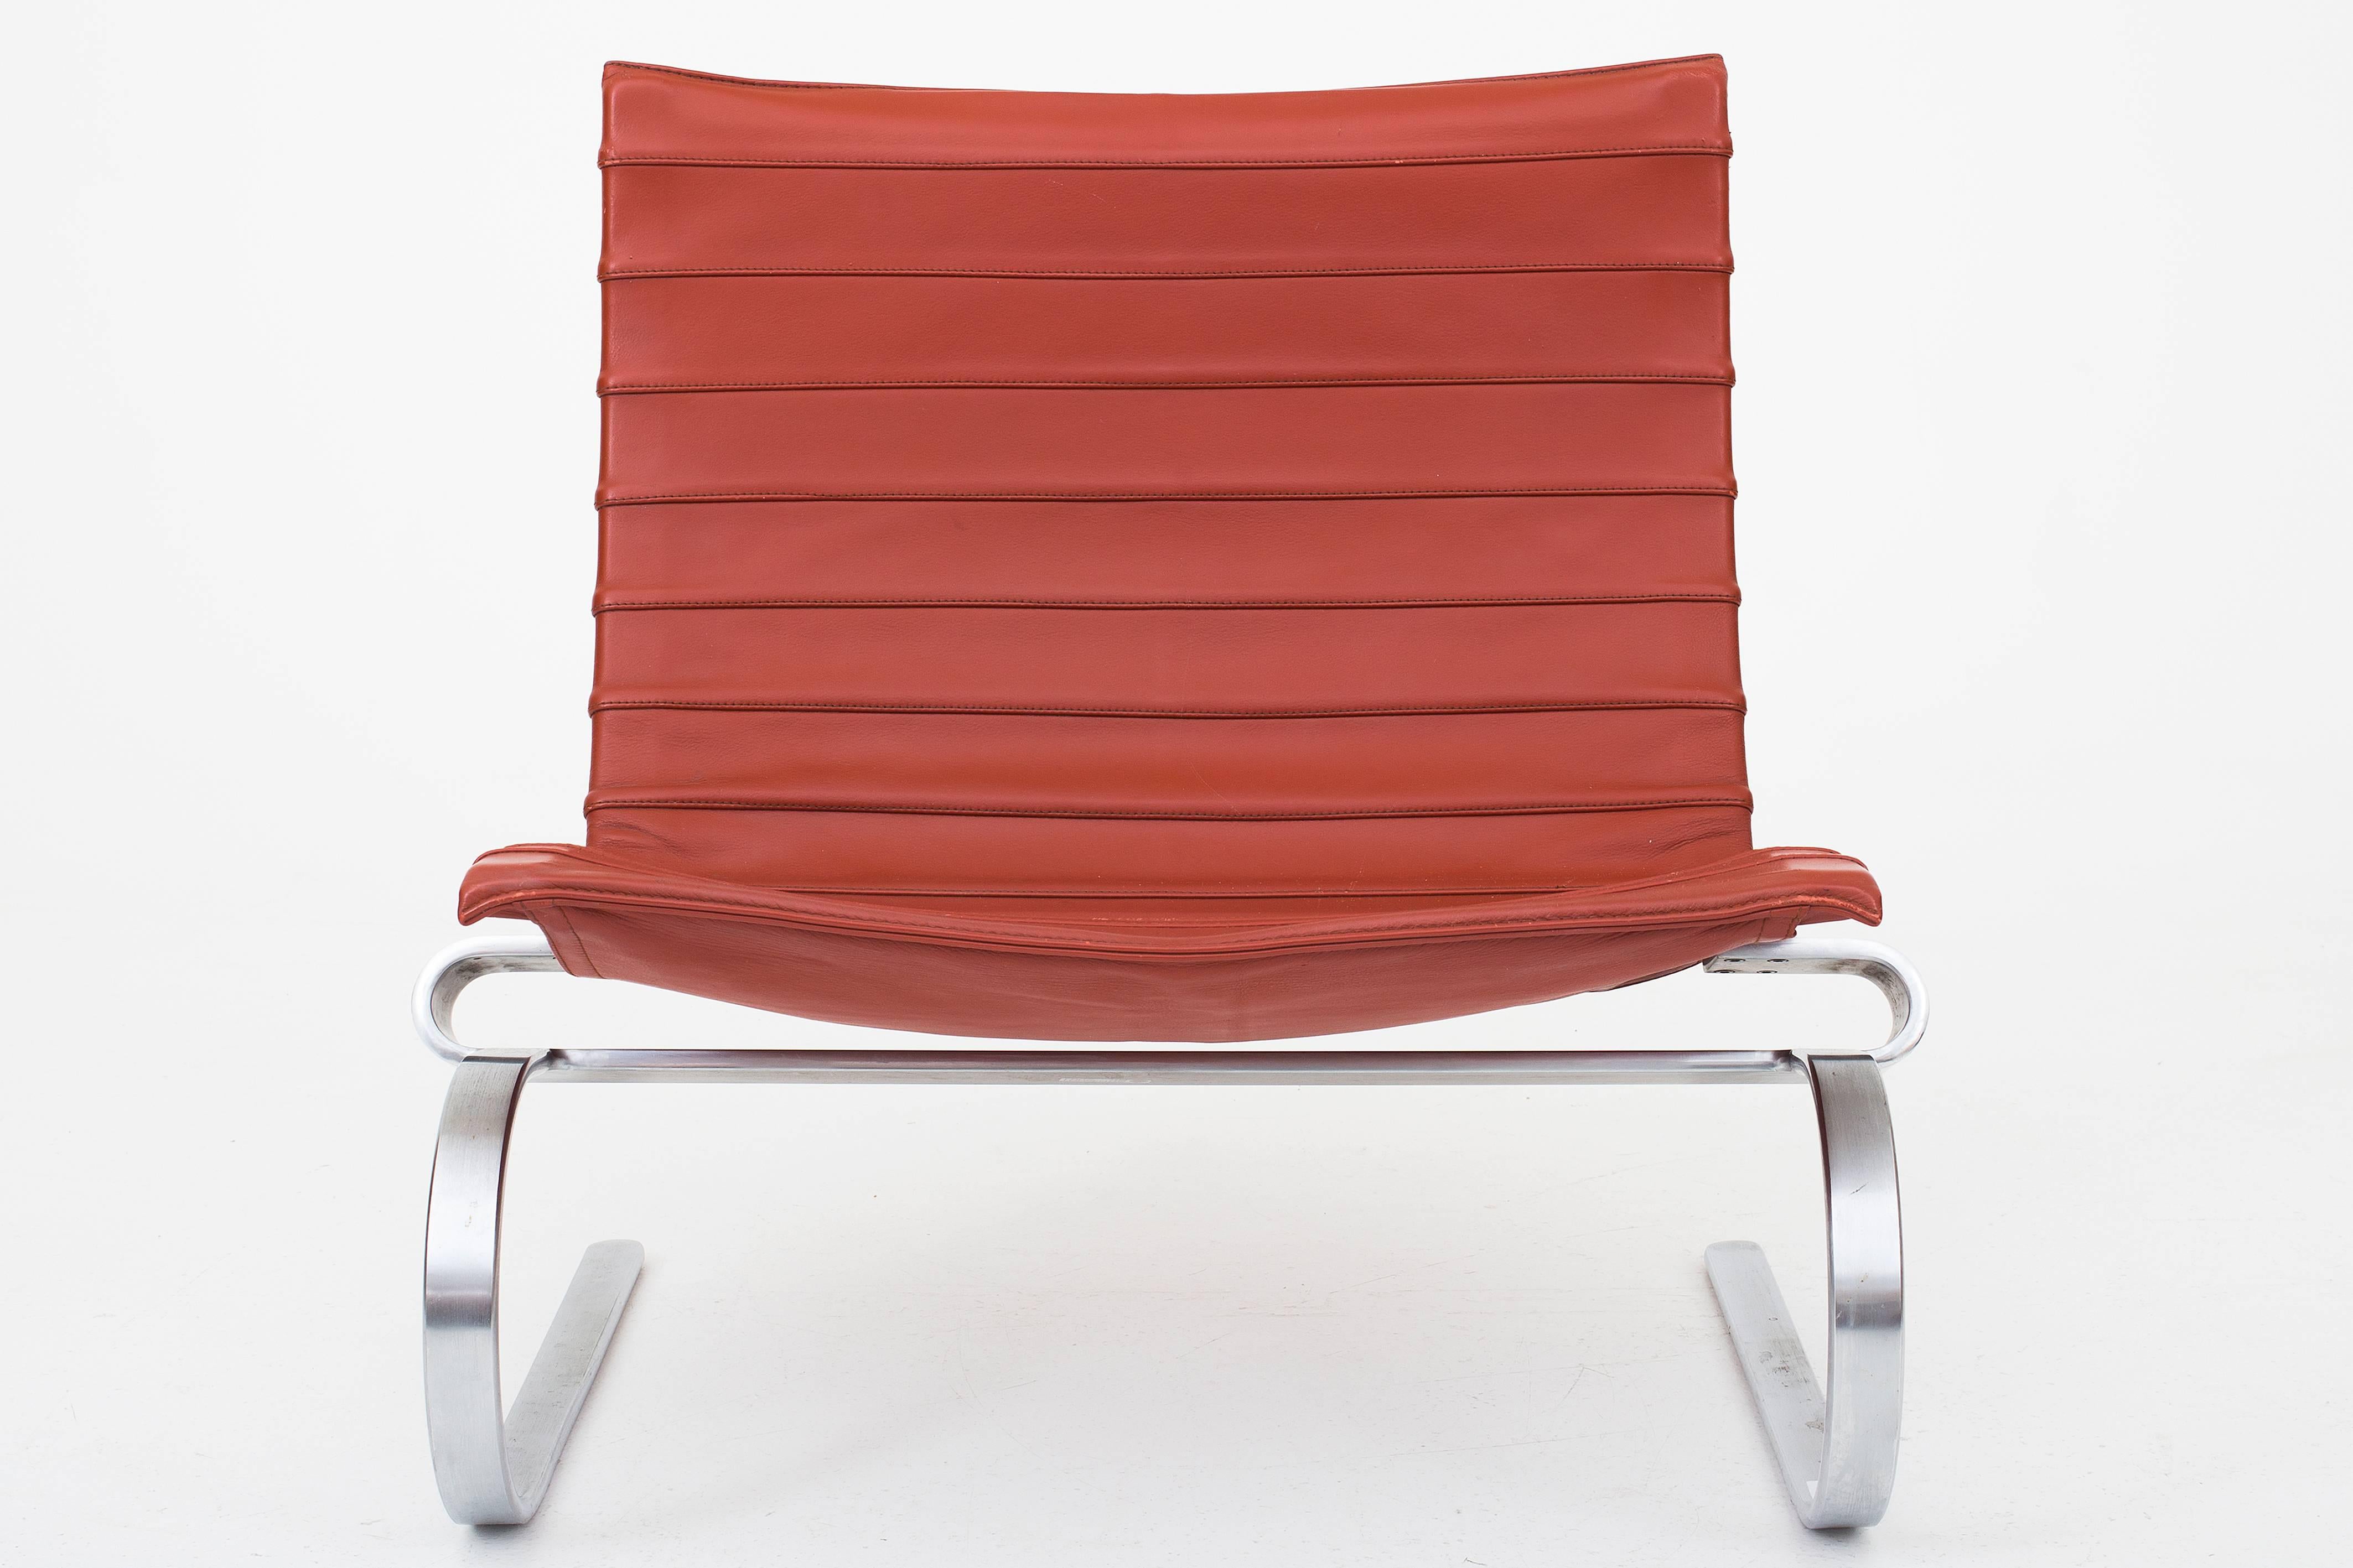 PK 20 lounge chair in red leather.